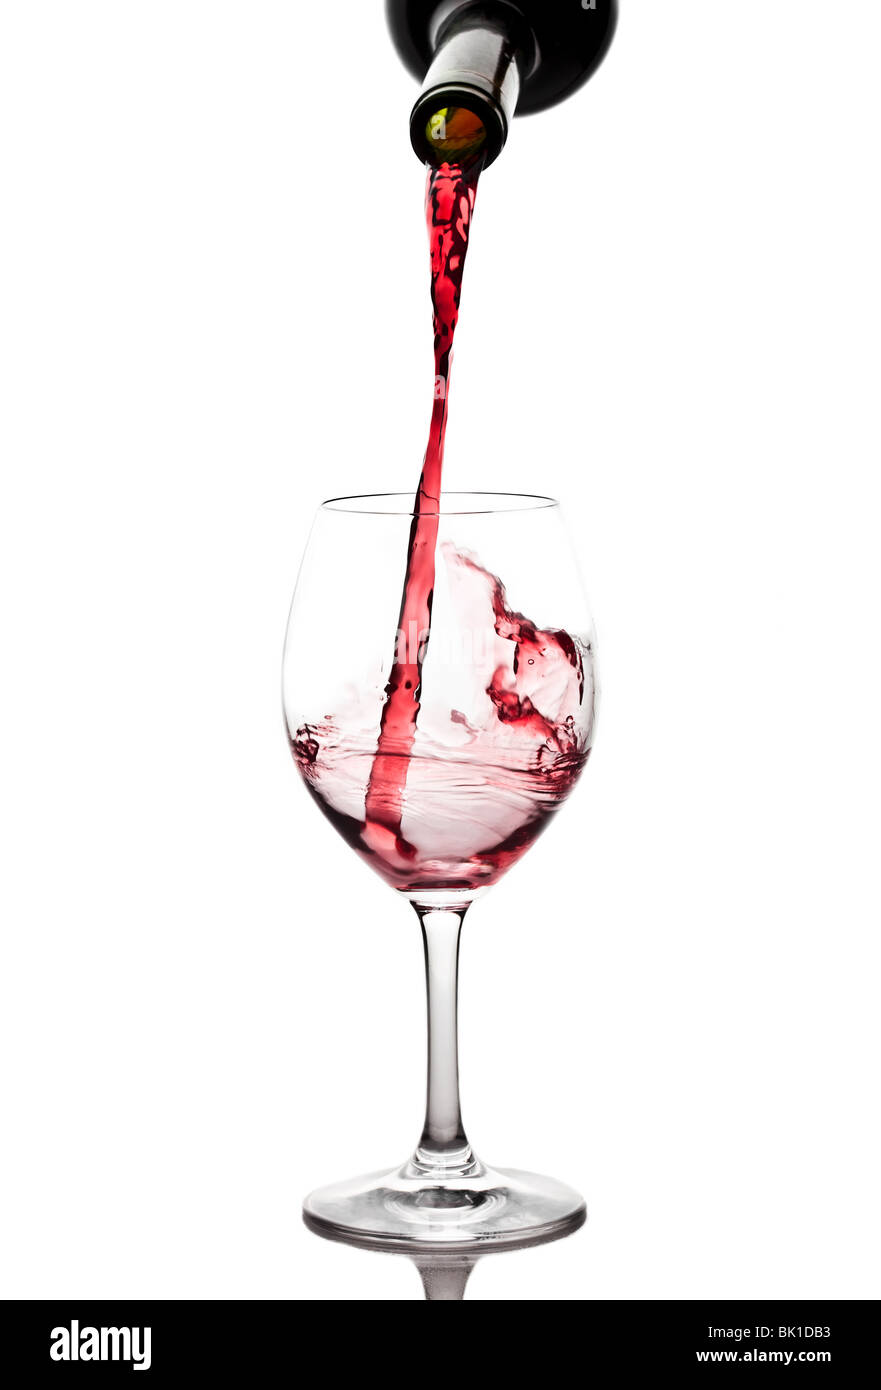 Red wine pouring into a wine glass Stock Photo